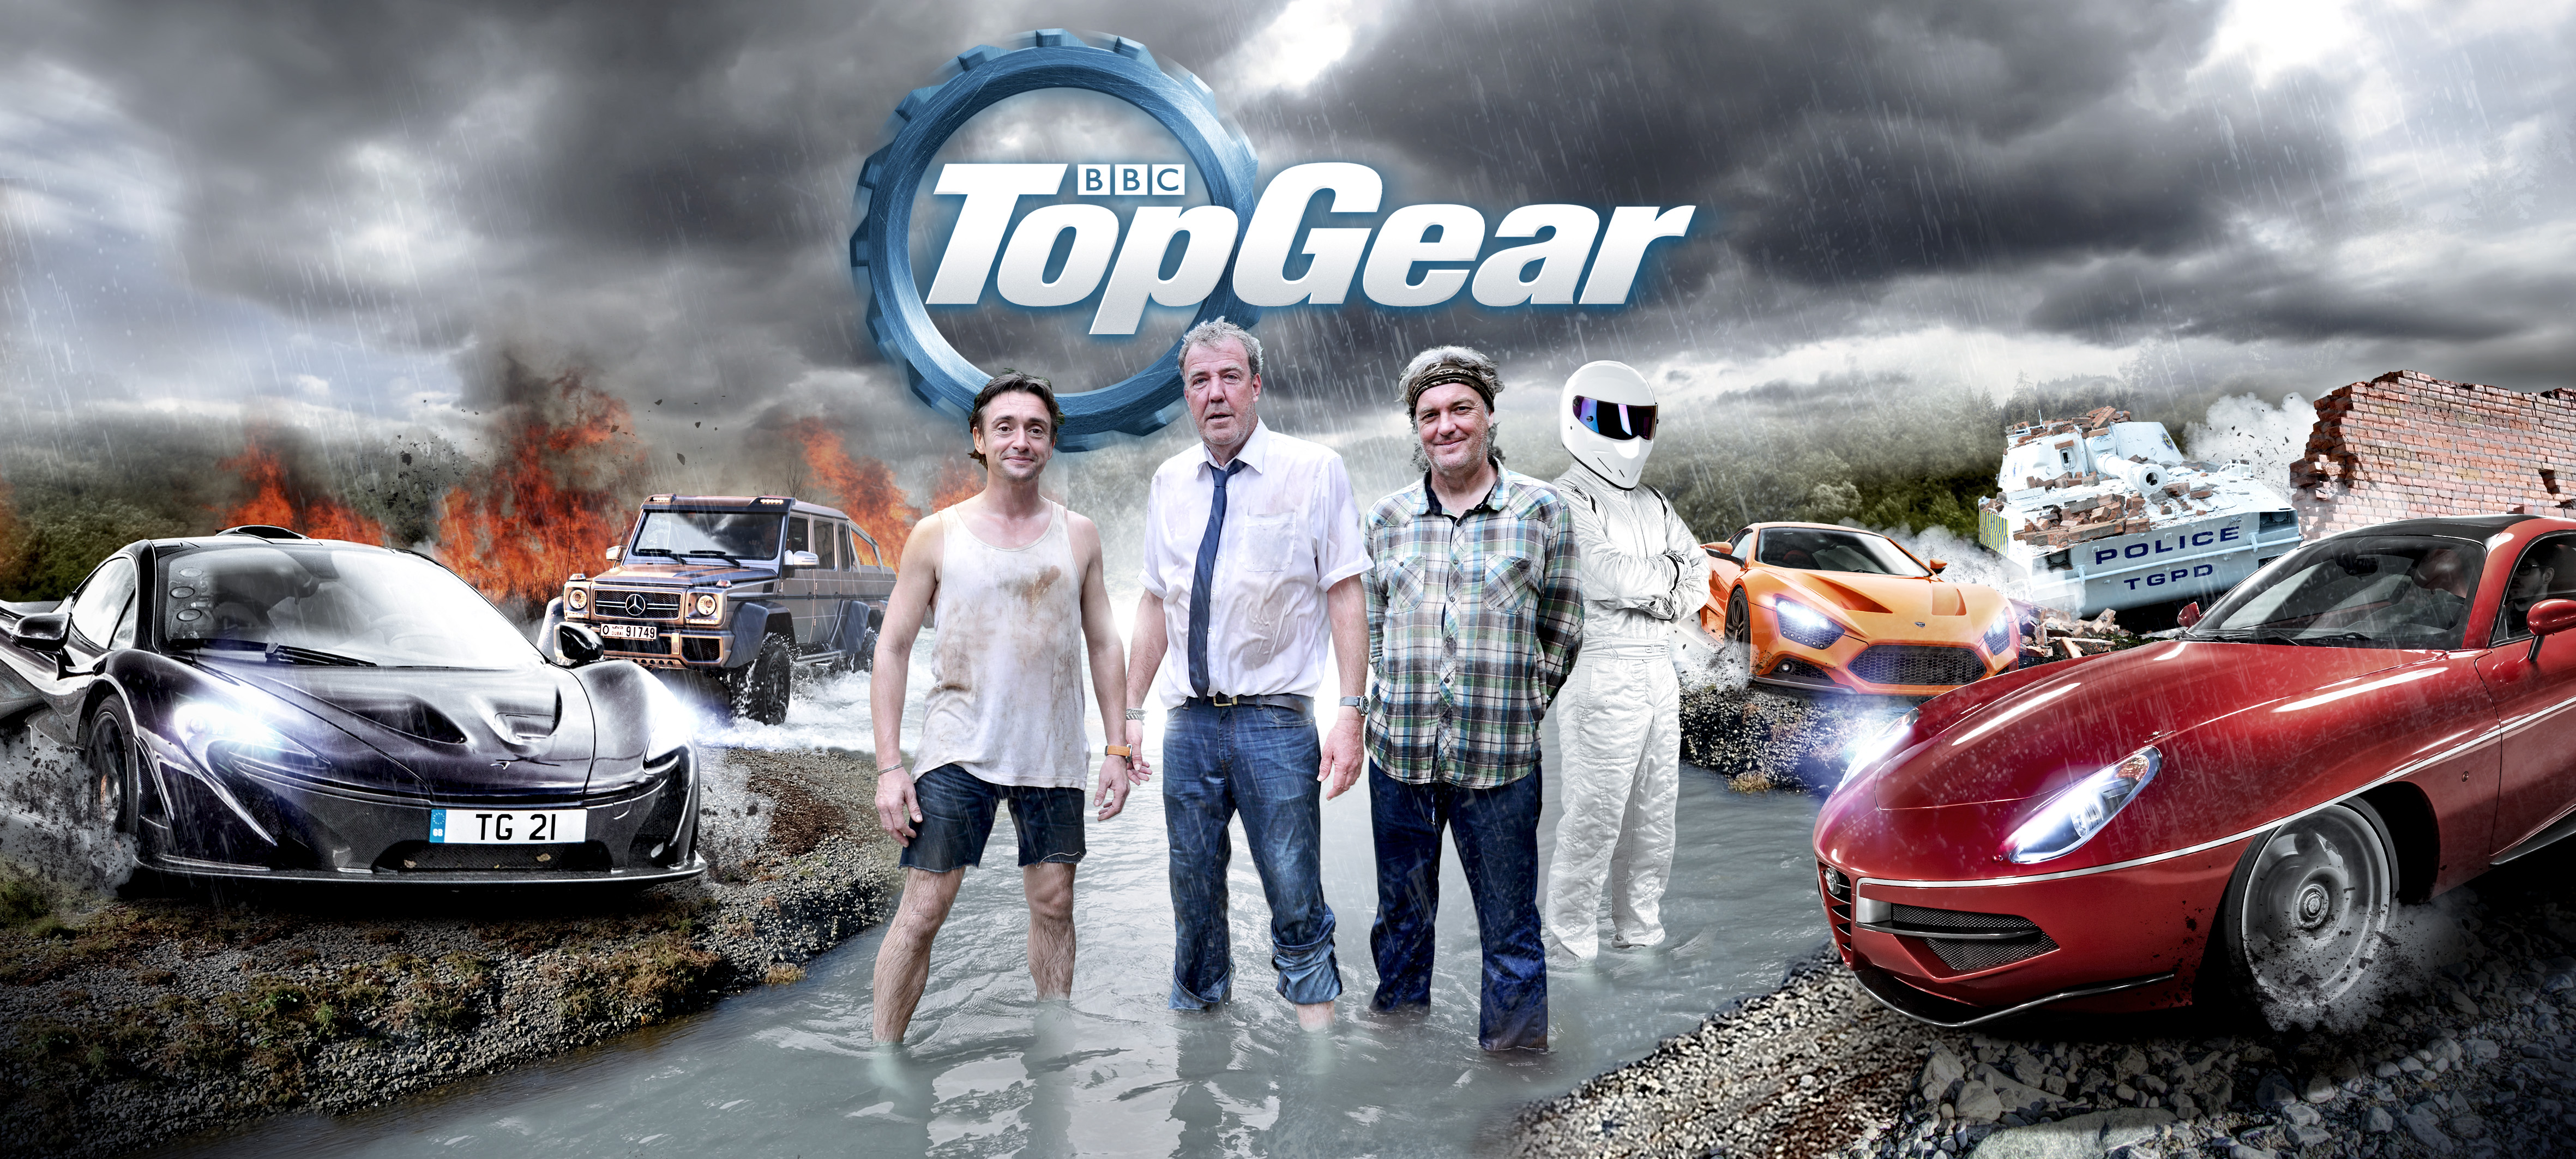 'Top Gear' Series 21 Set to Premiere in America on February 10 Telly